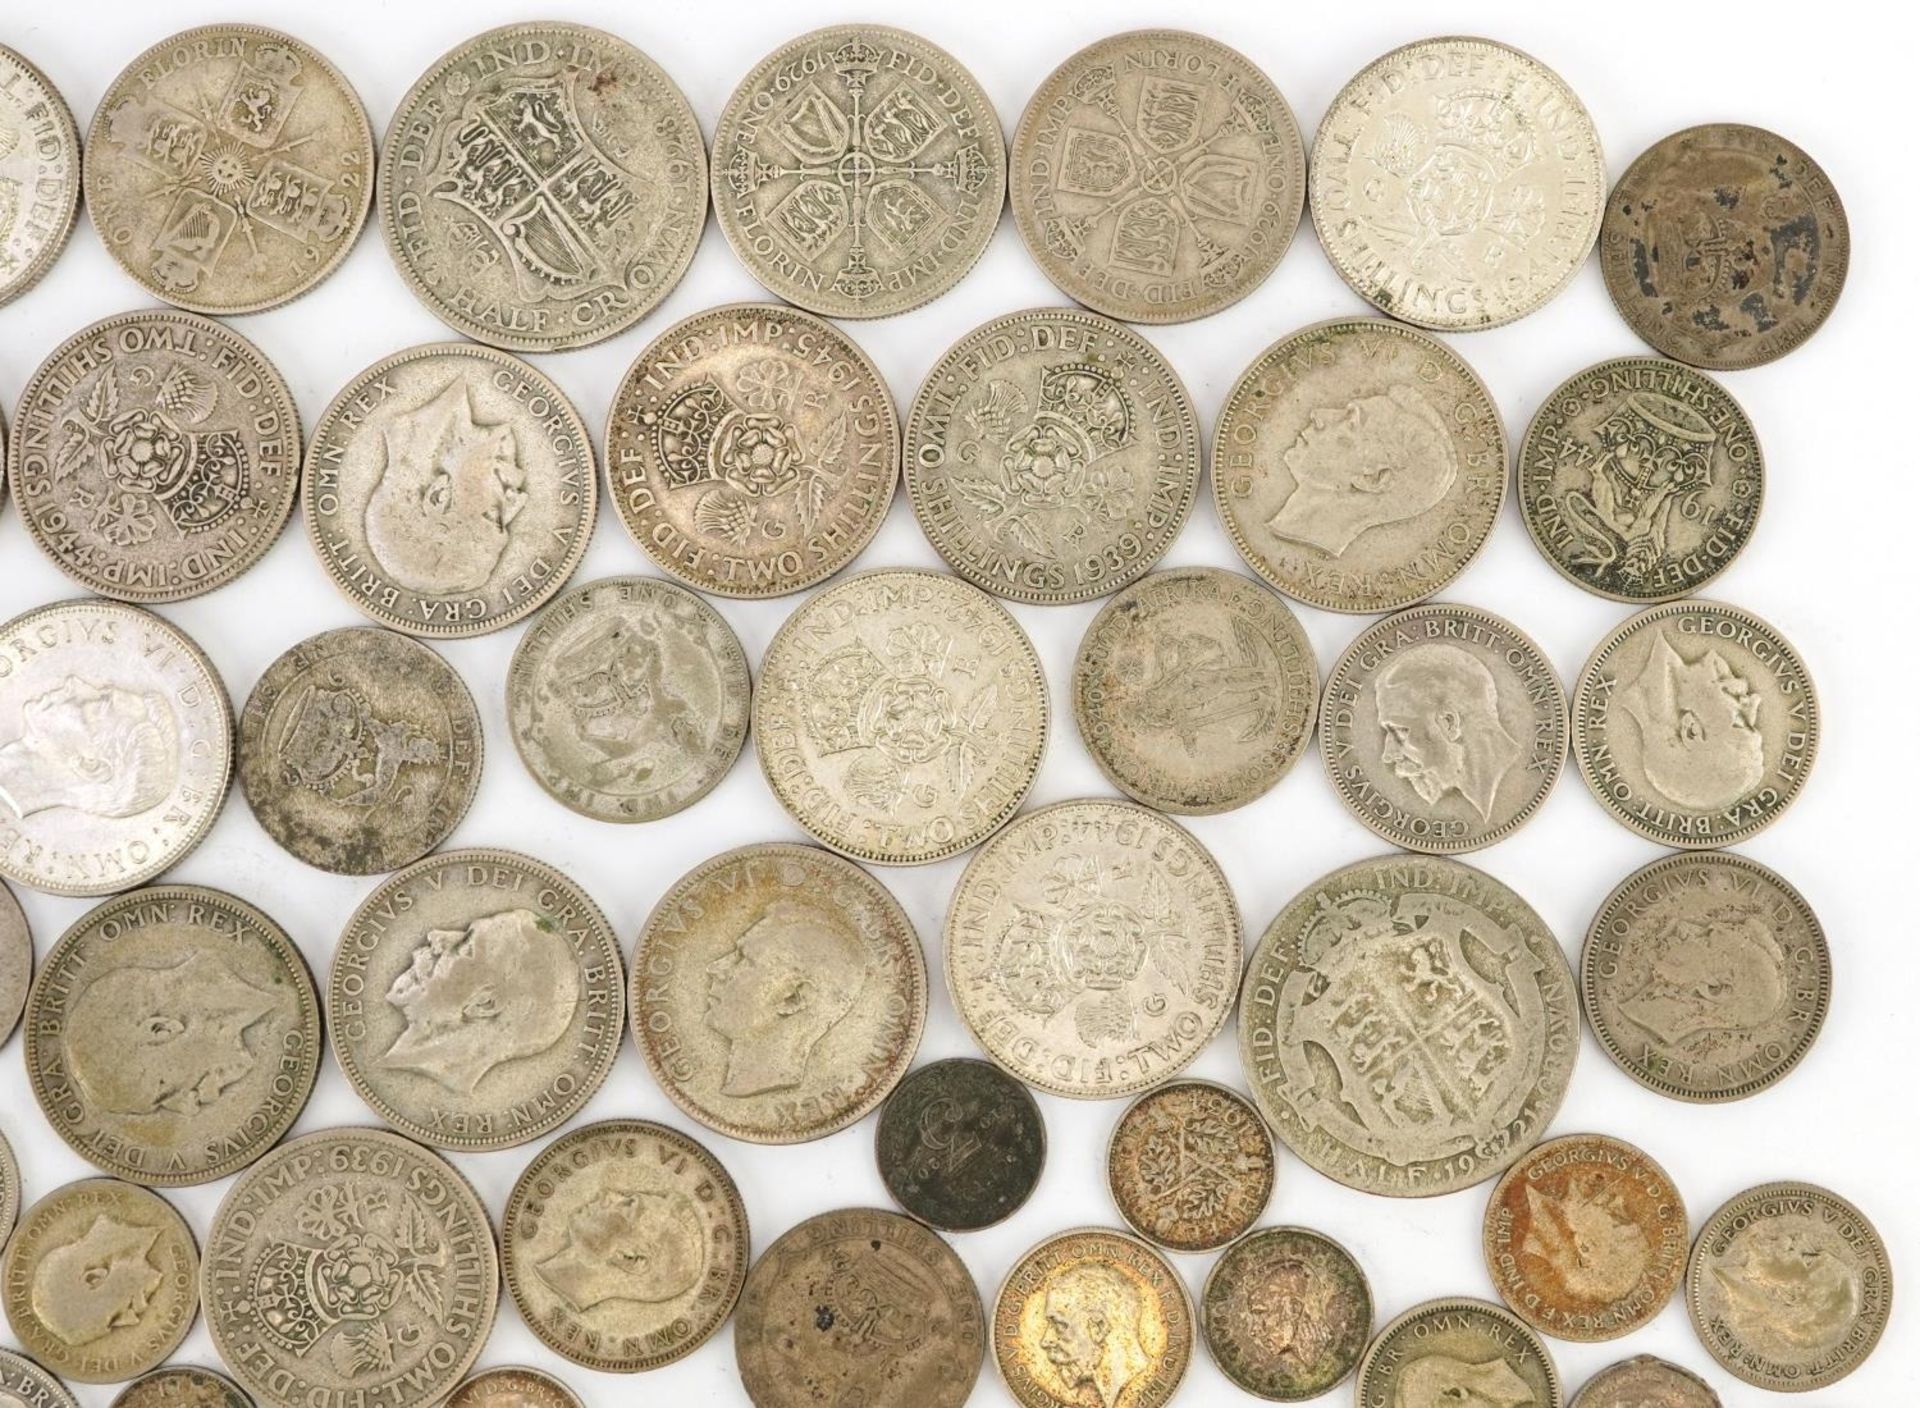 British pre decimal, pre 1947 coinage including half crowns and two shillings, 400g - Image 3 of 5